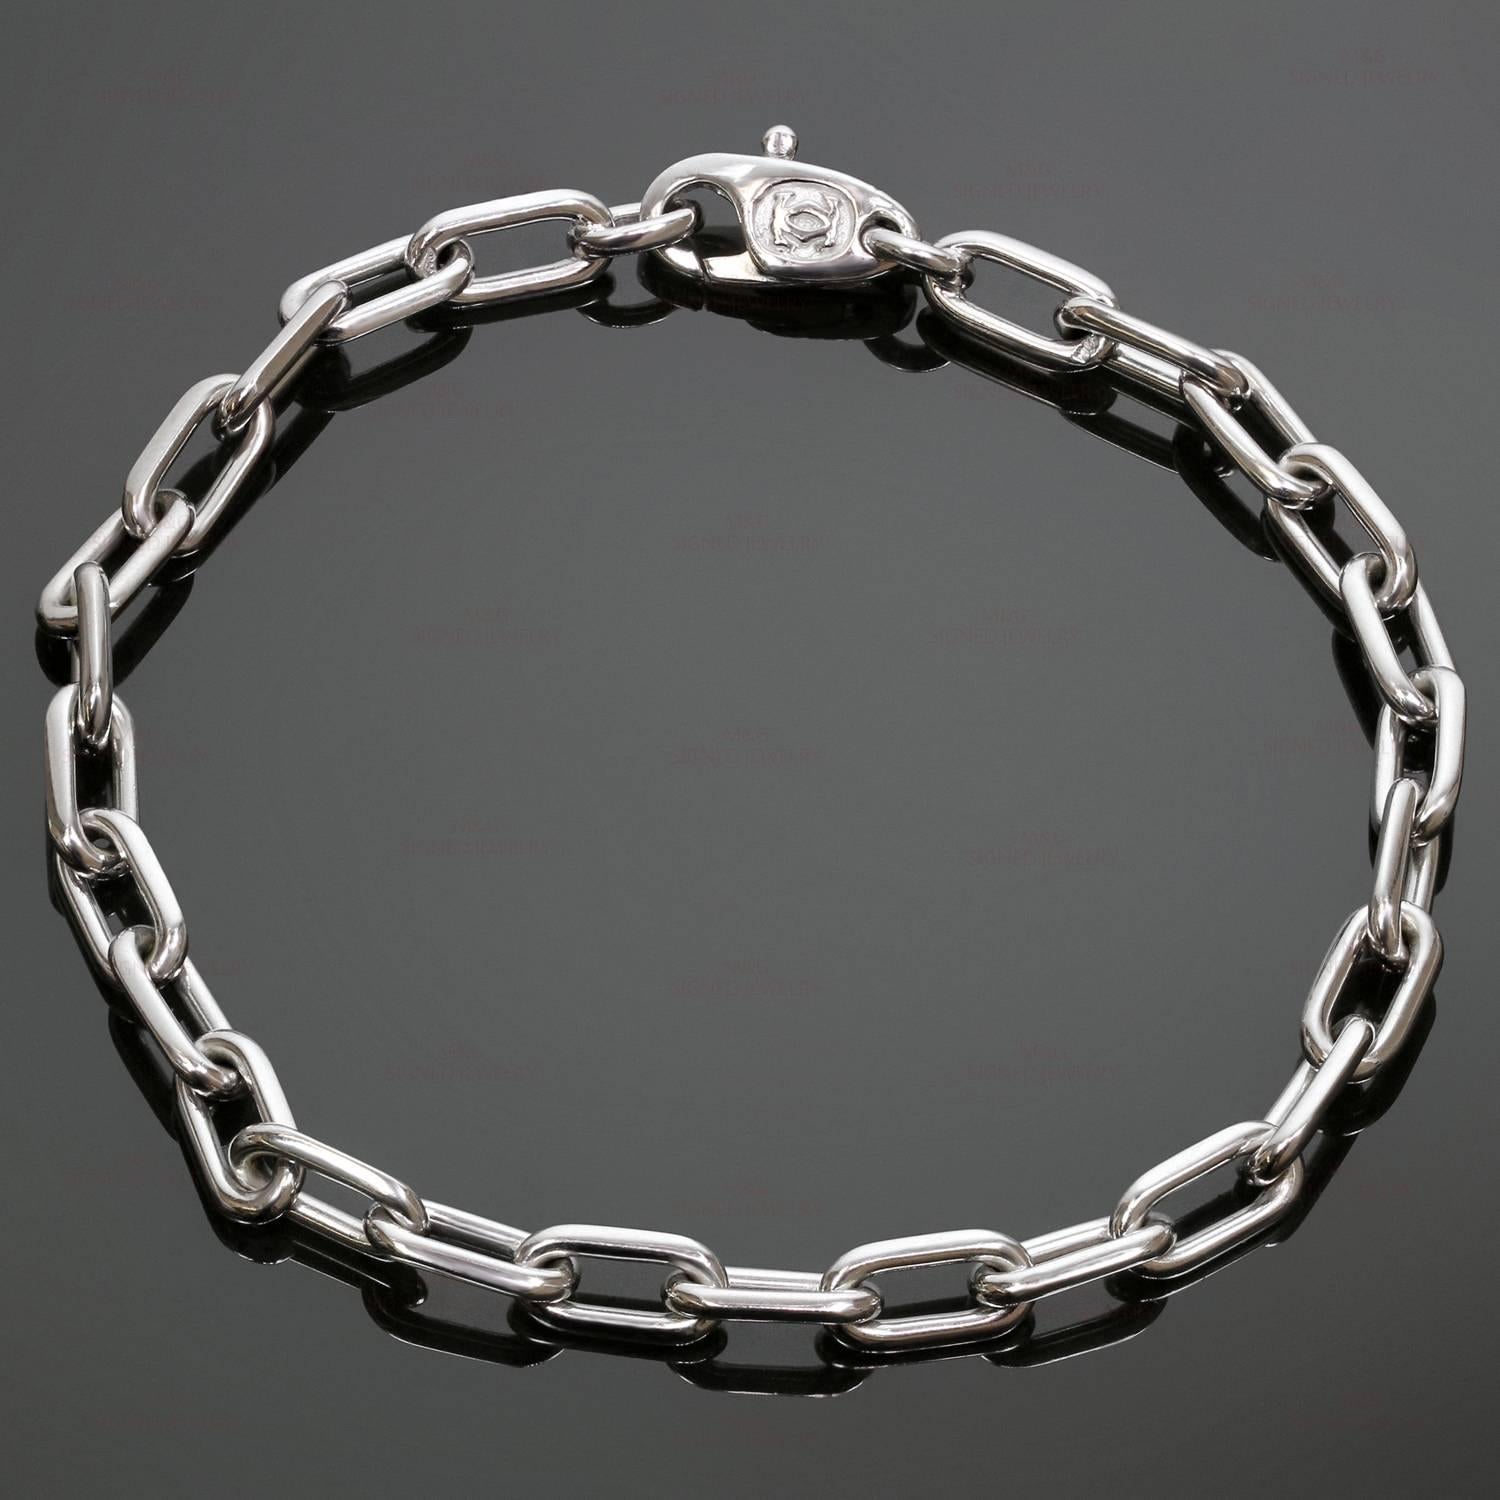 This modern Cartier chain bracelet from the classic collection is crafted in 18k white gold. Made in France circa 2000s. Measurements: 0.19" (5mm) width, 7.5" (19.5cm) length. 